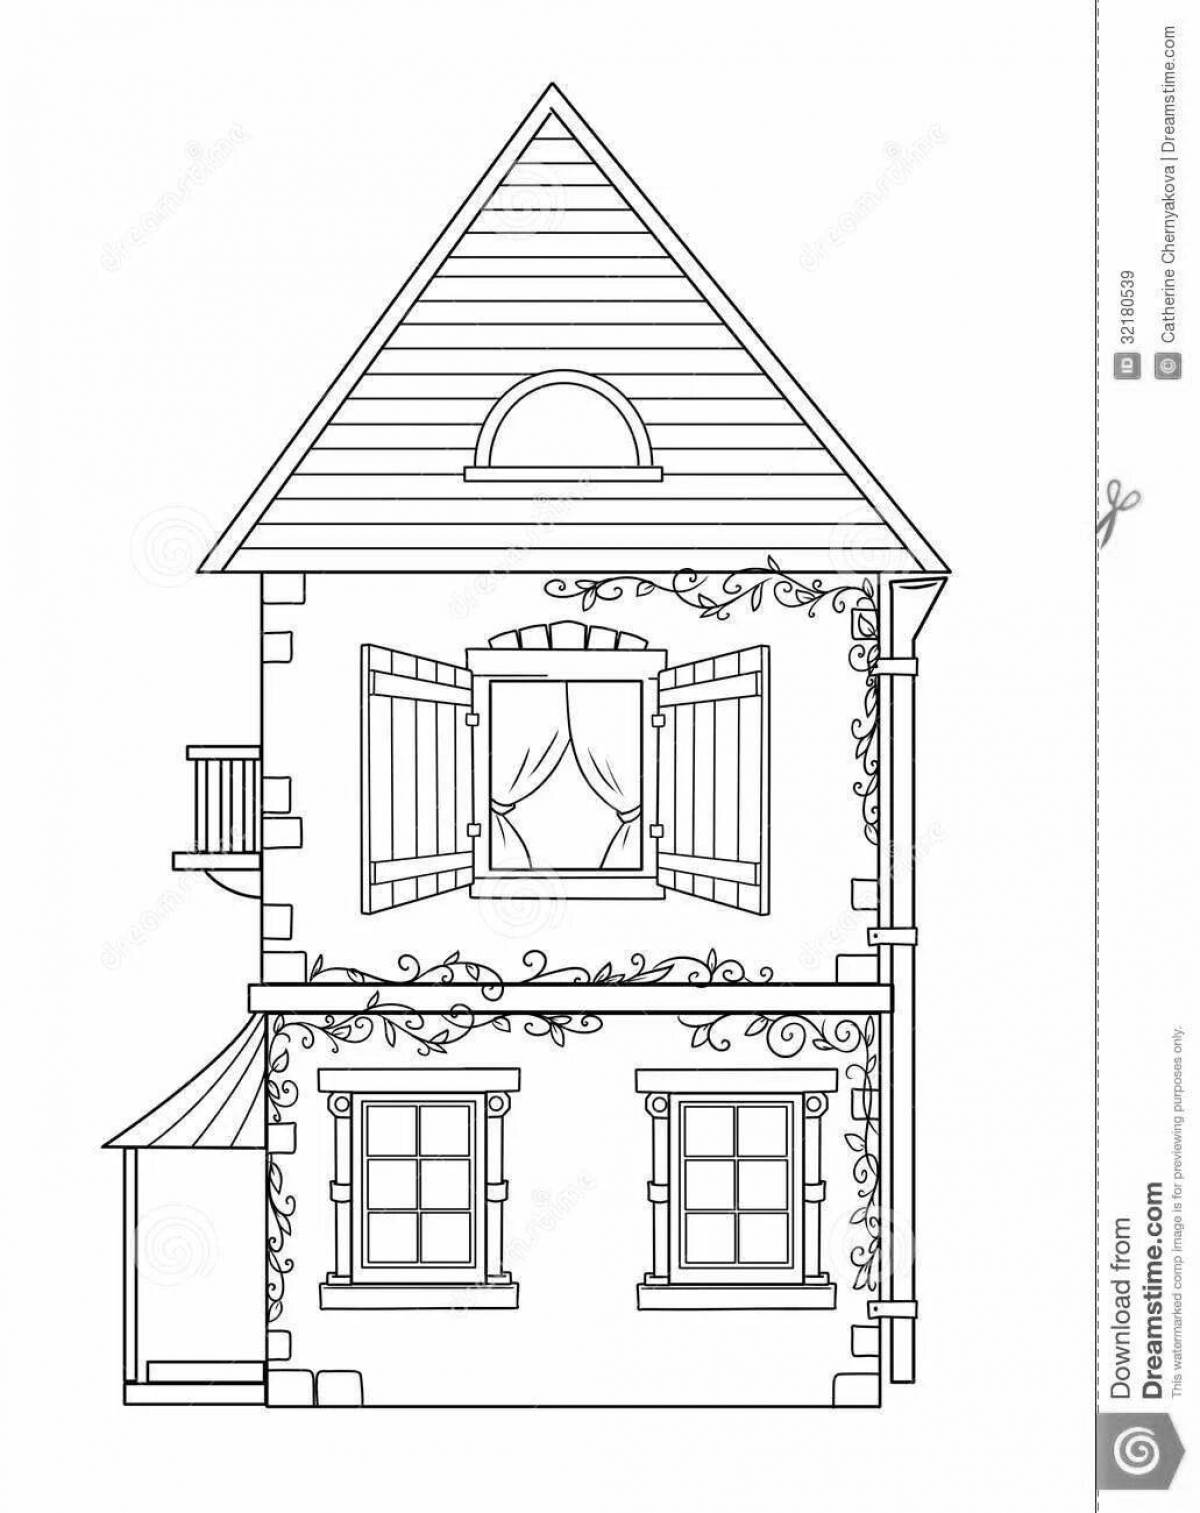 Colouring a gorgeous two-story house